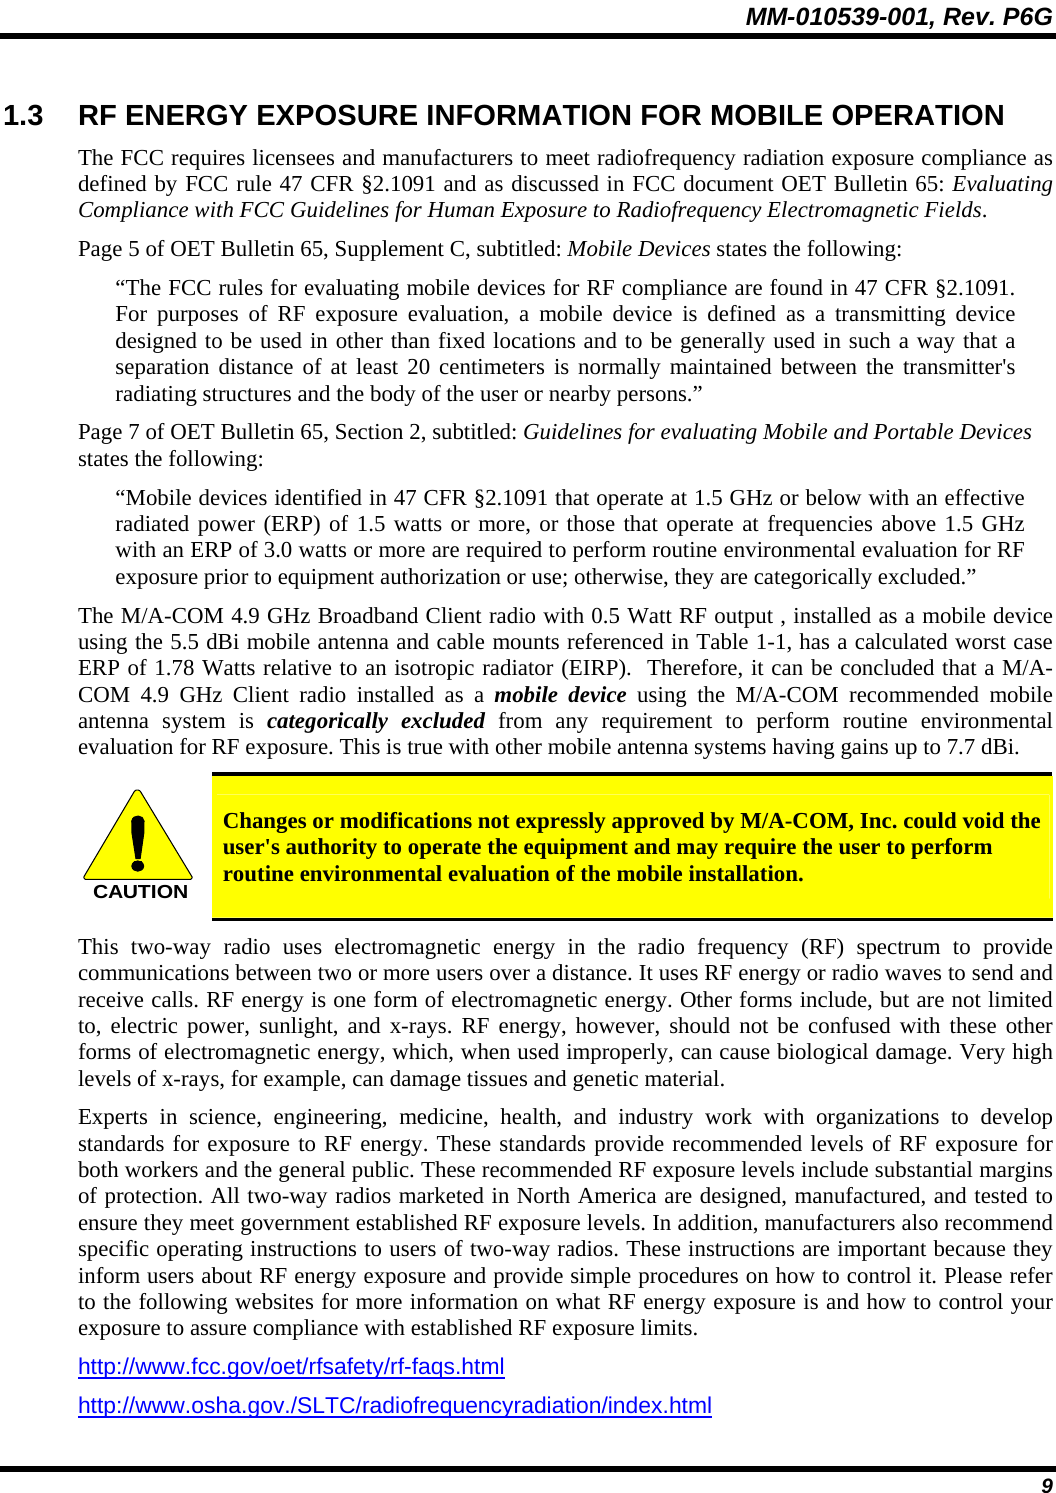 MM-010539-001, Rev. P6G  9 1.3  RF ENERGY EXPOSURE INFORMATION FOR MOBILE OPERATION The FCC requires licensees and manufacturers to meet radiofrequency radiation exposure compliance as defined by FCC rule 47 CFR §2.1091 and as discussed in FCC document OET Bulletin 65: Evaluating Compliance with FCC Guidelines for Human Exposure to Radiofrequency Electromagnetic Fields. Page 5 of OET Bulletin 65, Supplement C, subtitled: Mobile Devices states the following: “The FCC rules for evaluating mobile devices for RF compliance are found in 47 CFR §2.1091.  For purposes of RF exposure evaluation, a mobile device is defined as a transmitting device designed to be used in other than fixed locations and to be generally used in such a way that a separation distance of at least 20 centimeters is normally maintained between the transmitter&apos;s radiating structures and the body of the user or nearby persons.” Page 7 of OET Bulletin 65, Section 2, subtitled: Guidelines for evaluating Mobile and Portable Devices states the following: “Mobile devices identified in 47 CFR §2.1091 that operate at 1.5 GHz or below with an effective radiated power (ERP) of 1.5 watts or more, or those that operate at frequencies above 1.5 GHz with an ERP of 3.0 watts or more are required to perform routine environmental evaluation for RF exposure prior to equipment authorization or use; otherwise, they are categorically excluded.” The M/A-COM 4.9 GHz Broadband Client radio with 0.5 Watt RF output , installed as a mobile device using the 5.5 dBi mobile antenna and cable mounts referenced in Table 1-1, has a calculated worst case ERP of 1.78 Watts relative to an isotropic radiator (EIRP).  Therefore, it can be concluded that a M/A-COM 4.9 GHz Client radio installed as a mobile device using the M/A-COM recommended mobile antenna system is categorically excluded from any requirement to perform routine environmental evaluation for RF exposure. This is true with other mobile antenna systems having gains up to 7.7 dBi. CAUTION Changes or modifications not expressly approved by M/A-COM, Inc. could void the user&apos;s authority to operate the equipment and may require the user to perform routine environmental evaluation of the mobile installation. This two-way radio uses electromagnetic energy in the radio frequency (RF) spectrum to provide communications between two or more users over a distance. It uses RF energy or radio waves to send and receive calls. RF energy is one form of electromagnetic energy. Other forms include, but are not limited to, electric power, sunlight, and x-rays. RF energy, however, should not be confused with these other forms of electromagnetic energy, which, when used improperly, can cause biological damage. Very high levels of x-rays, for example, can damage tissues and genetic material. Experts in science, engineering, medicine, health, and industry work with organizations to develop standards for exposure to RF energy. These standards provide recommended levels of RF exposure for both workers and the general public. These recommended RF exposure levels include substantial margins of protection. All two-way radios marketed in North America are designed, manufactured, and tested to ensure they meet government established RF exposure levels. In addition, manufacturers also recommend specific operating instructions to users of two-way radios. These instructions are important because they inform users about RF energy exposure and provide simple procedures on how to control it. Please refer to the following websites for more information on what RF energy exposure is and how to control your exposure to assure compliance with established RF exposure limits. http://www.fcc.gov/oet/rfsafety/rf-faqs.html http://www.osha.gov./SLTC/radiofrequencyradiation/index.html 